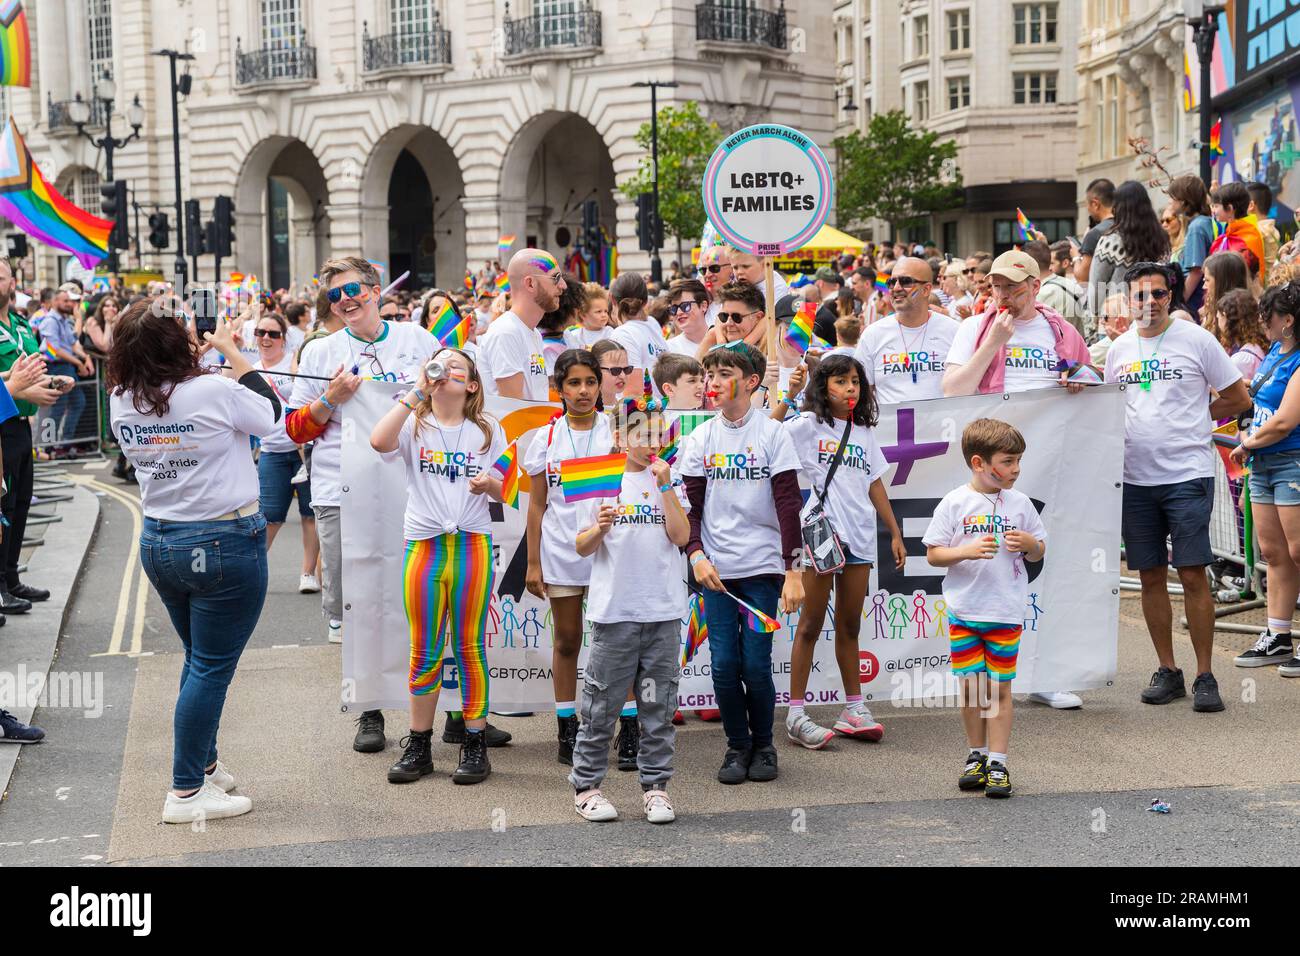 LGBT+ families marching group at Pride in London Stock Photo